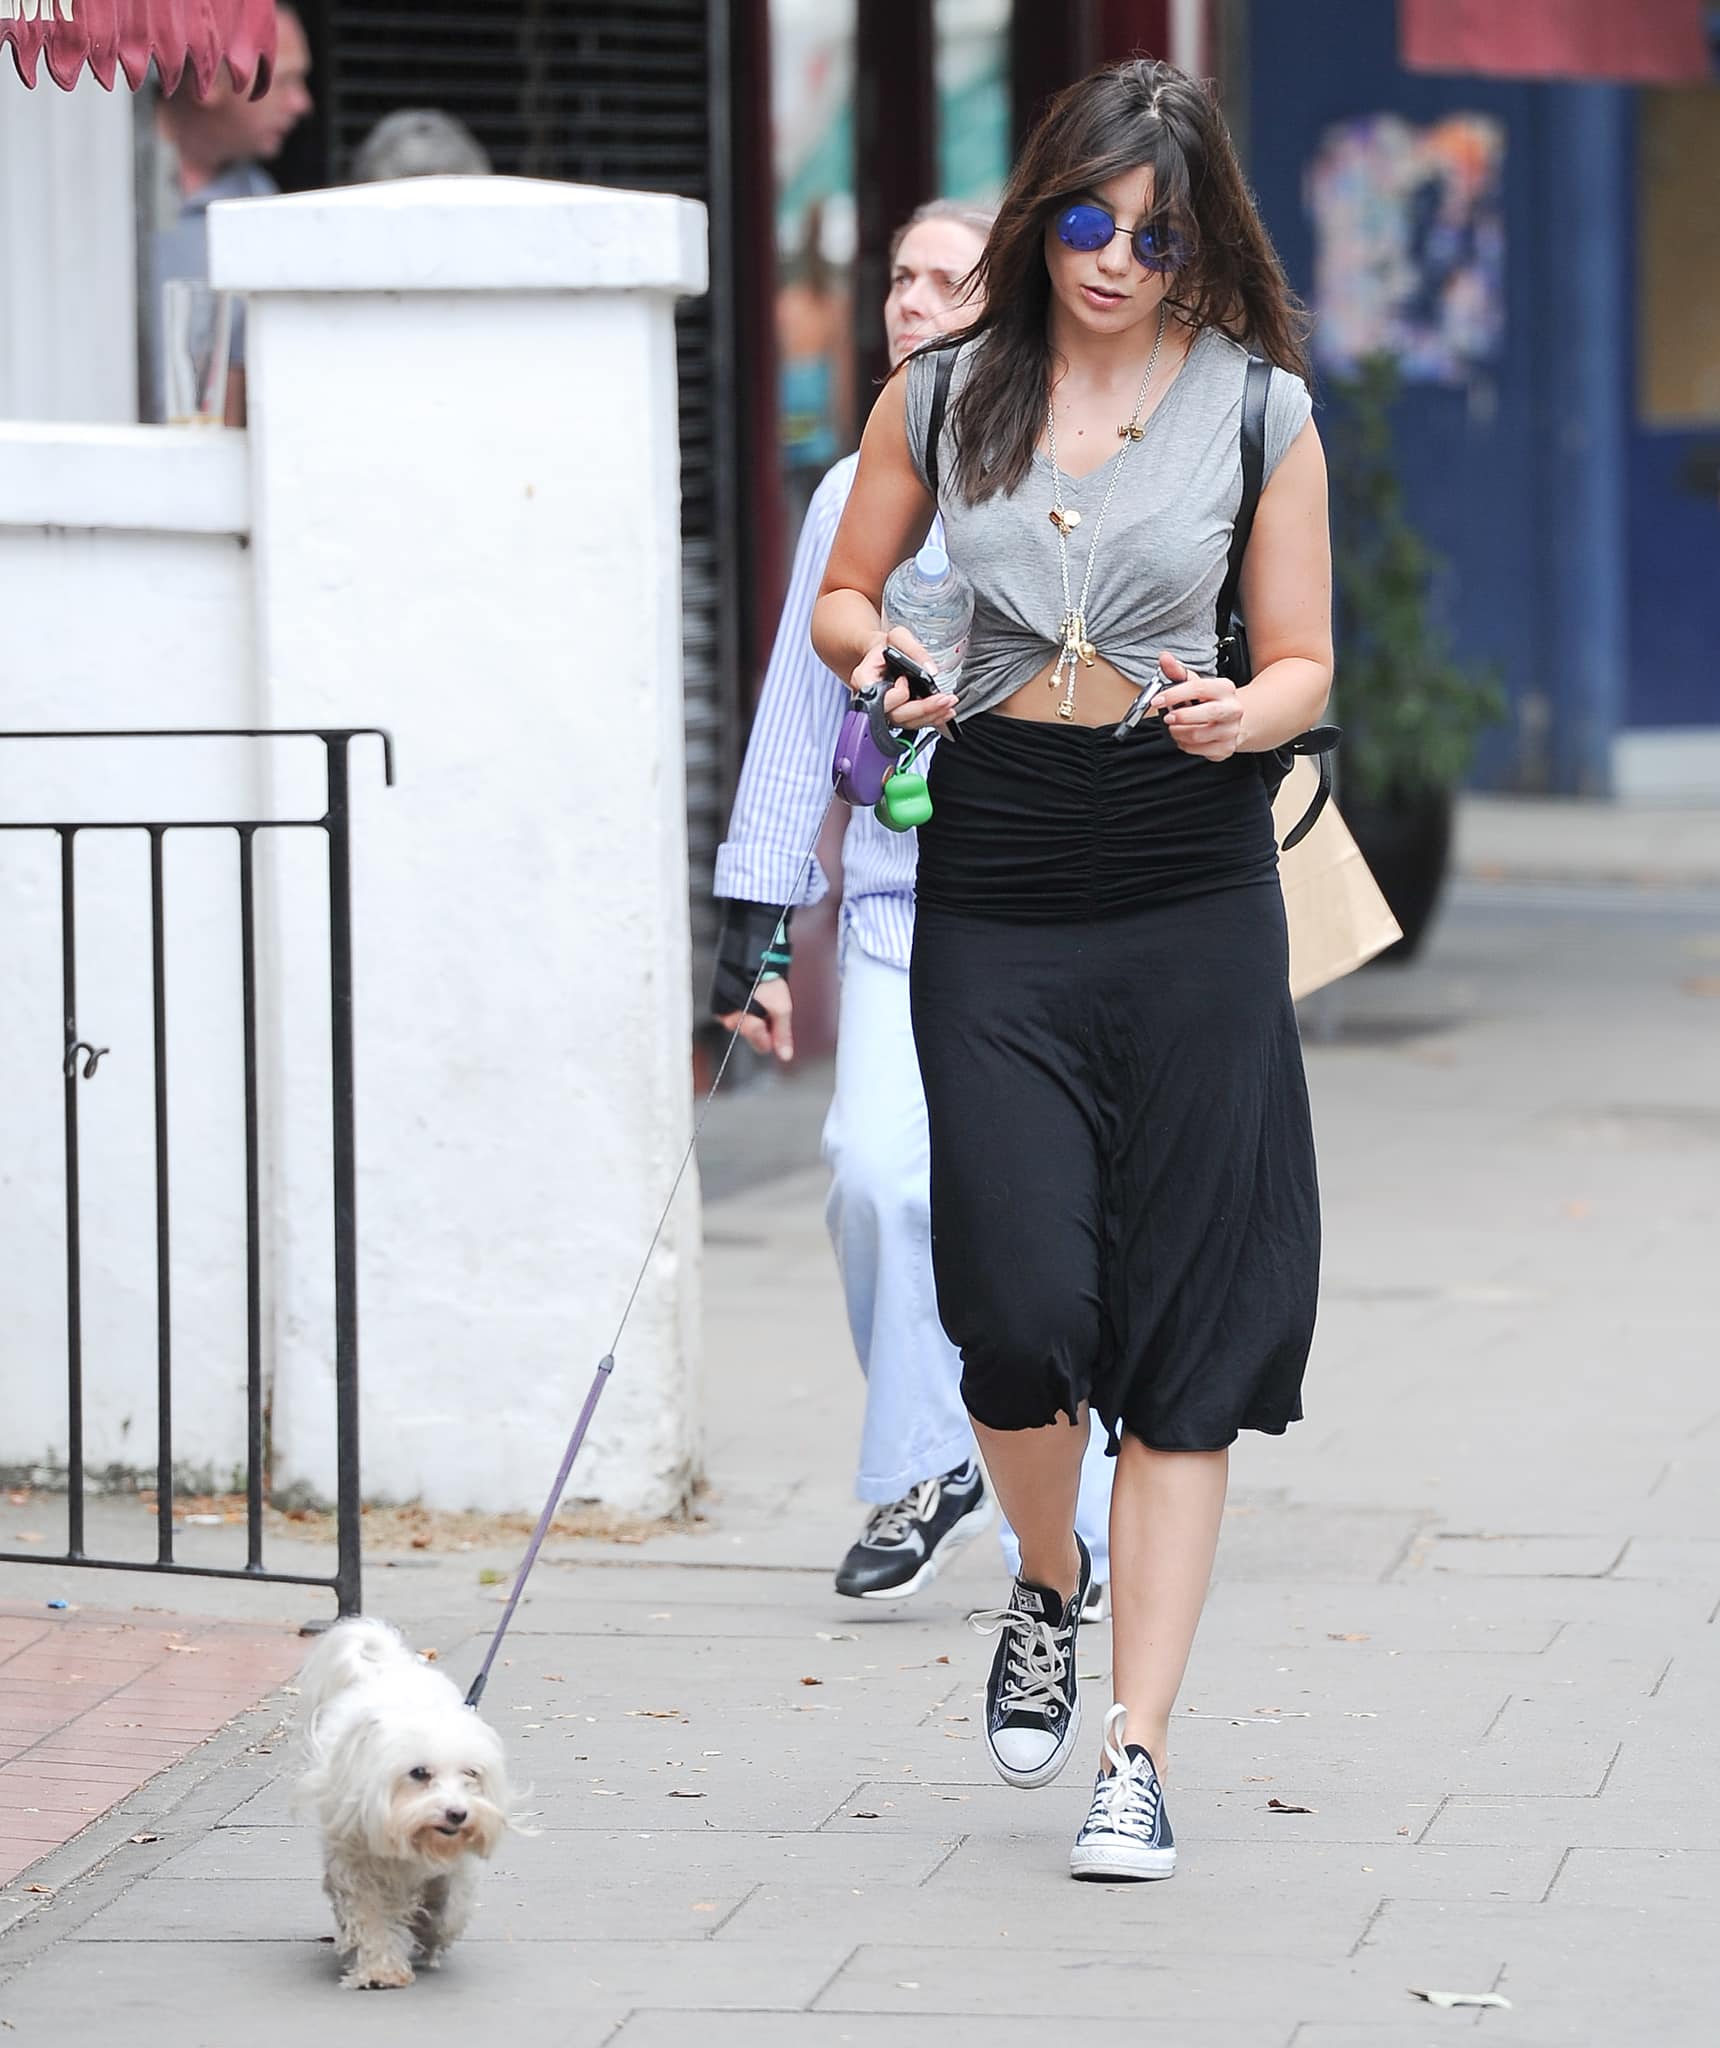 Daisy Lowe's dog is a Maltese Terrier that she adopted when she was still living in New York City